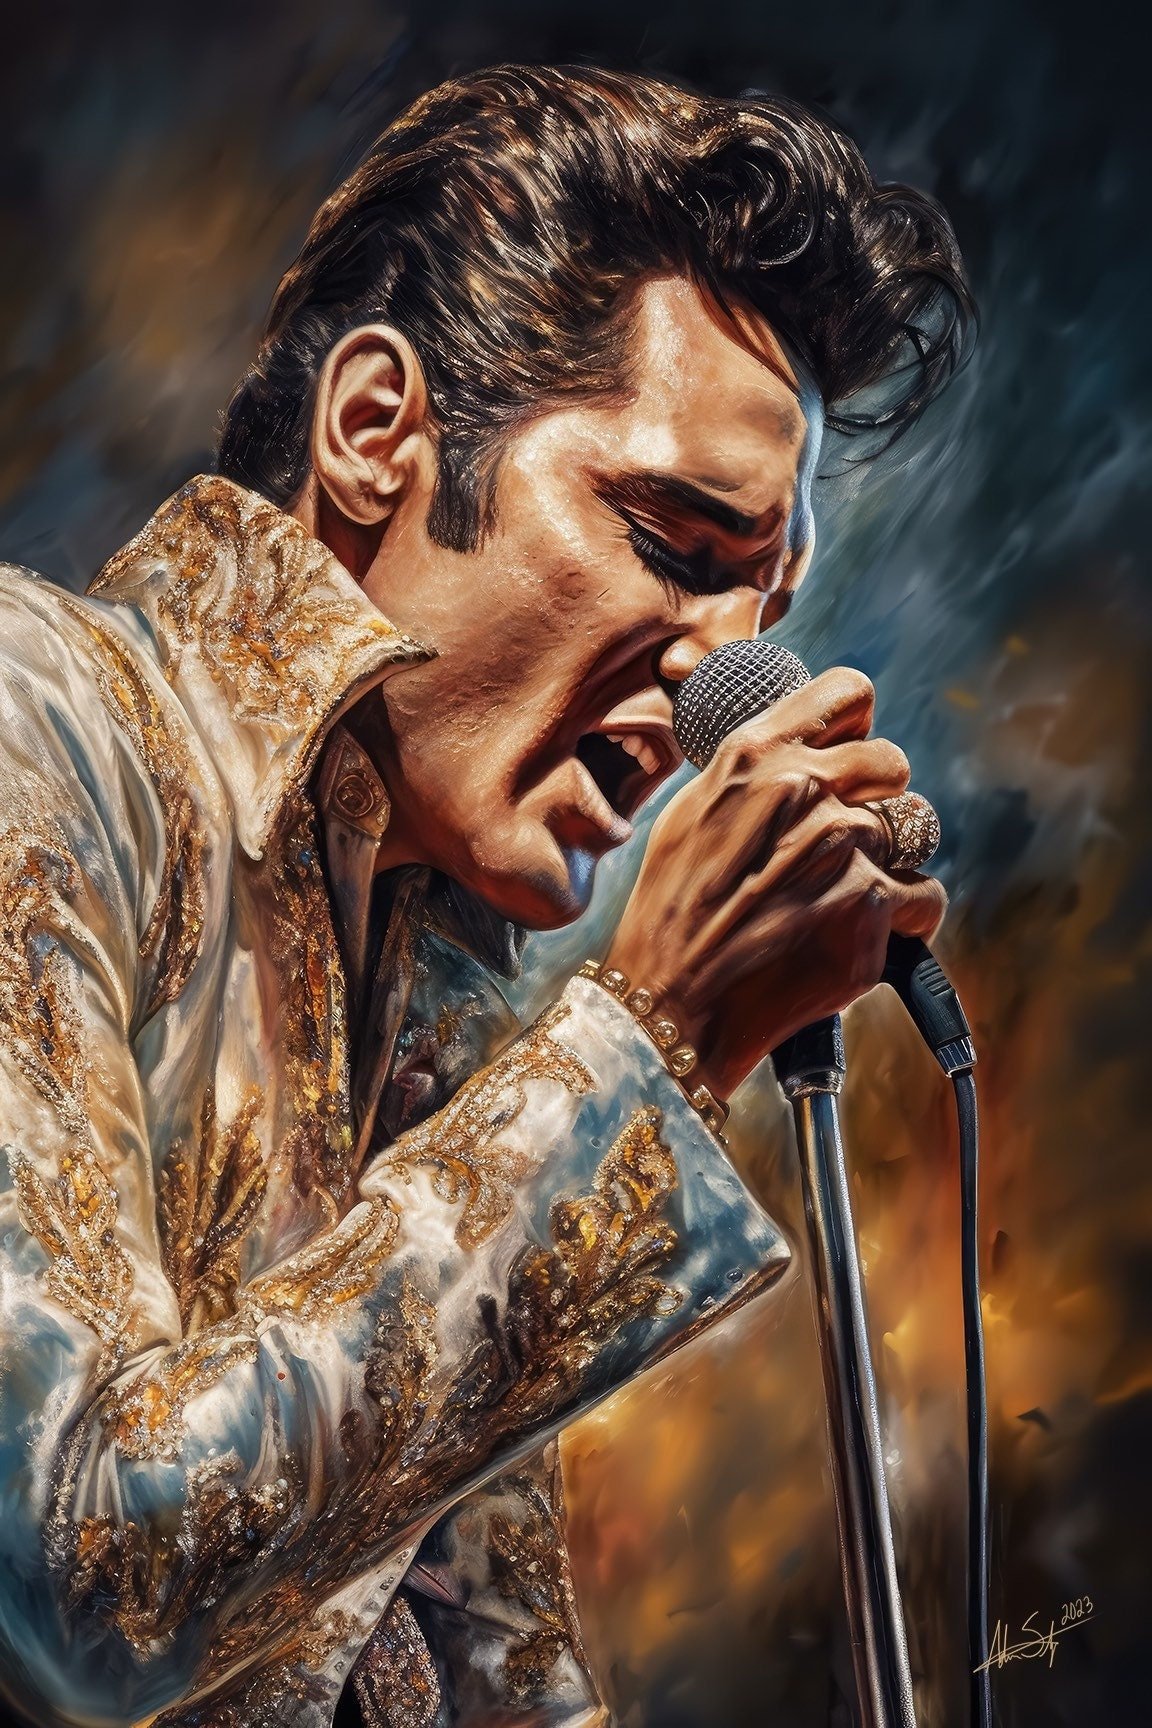 Burning Love | Elvis The King of Rock and Roll Digital Painting Aloha From Hawaii Wall Art Canvas Metal Prints Home Decor